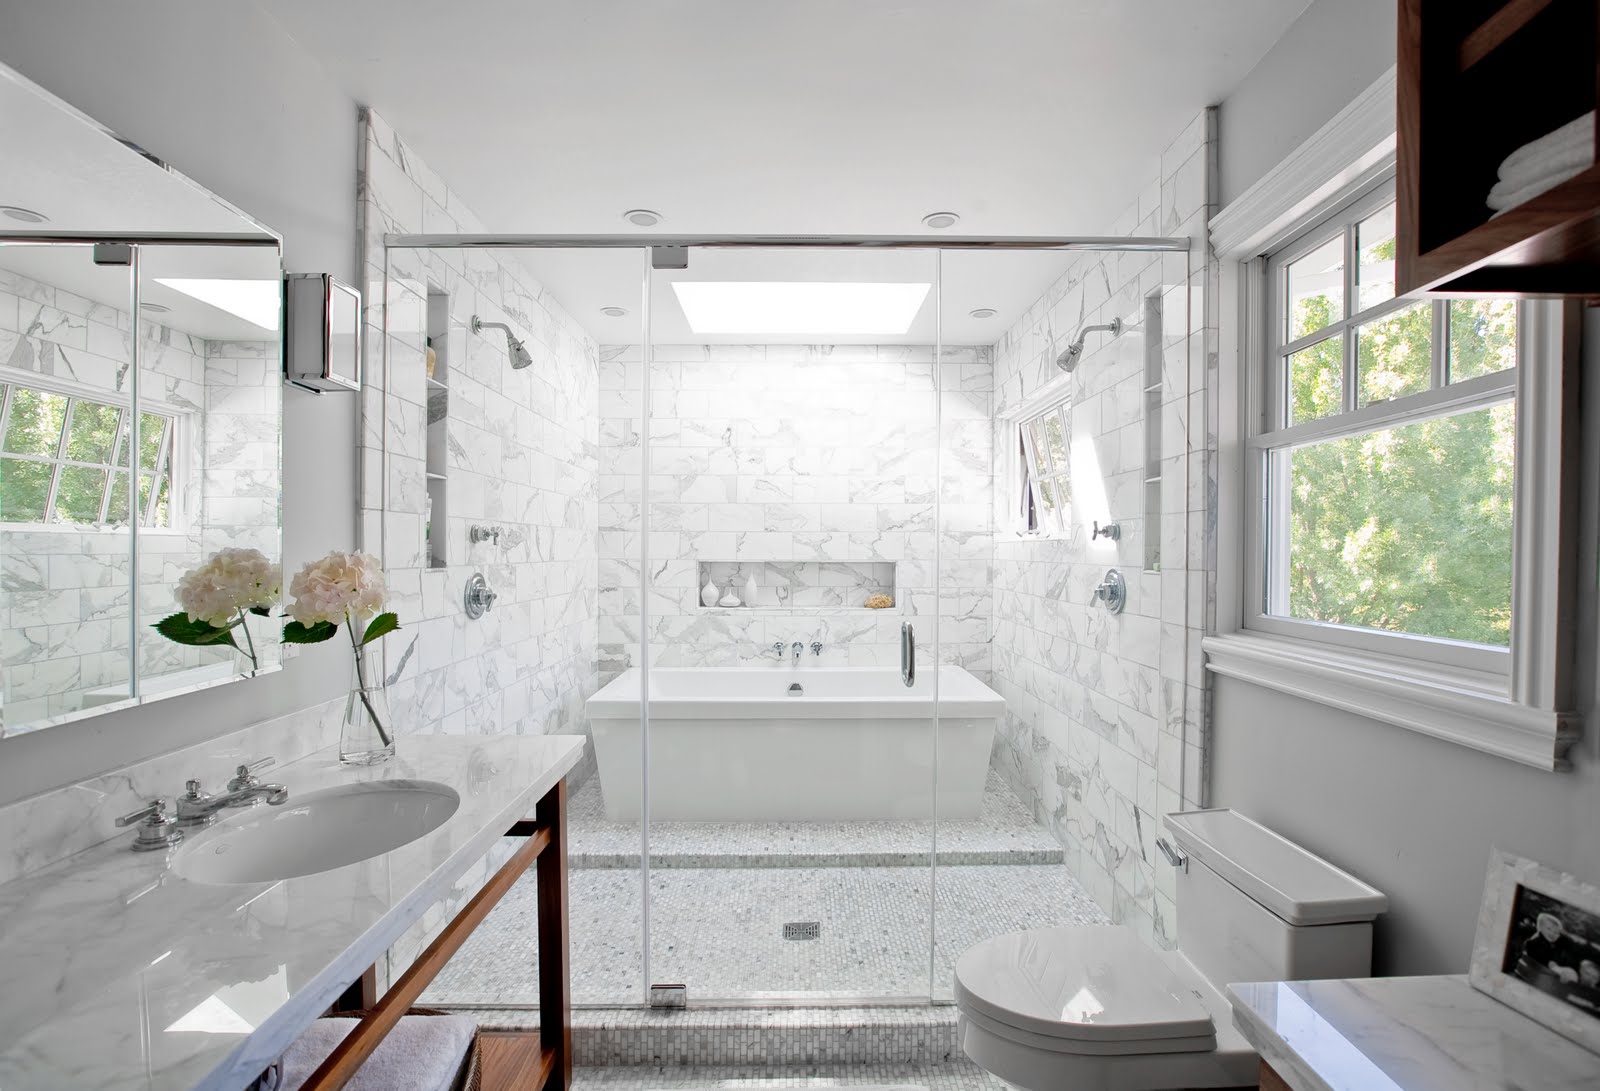 COCOCOZY: SMART DESIGN: A BATH TUB INSIDE A MARBLE SHOWER - OH ...